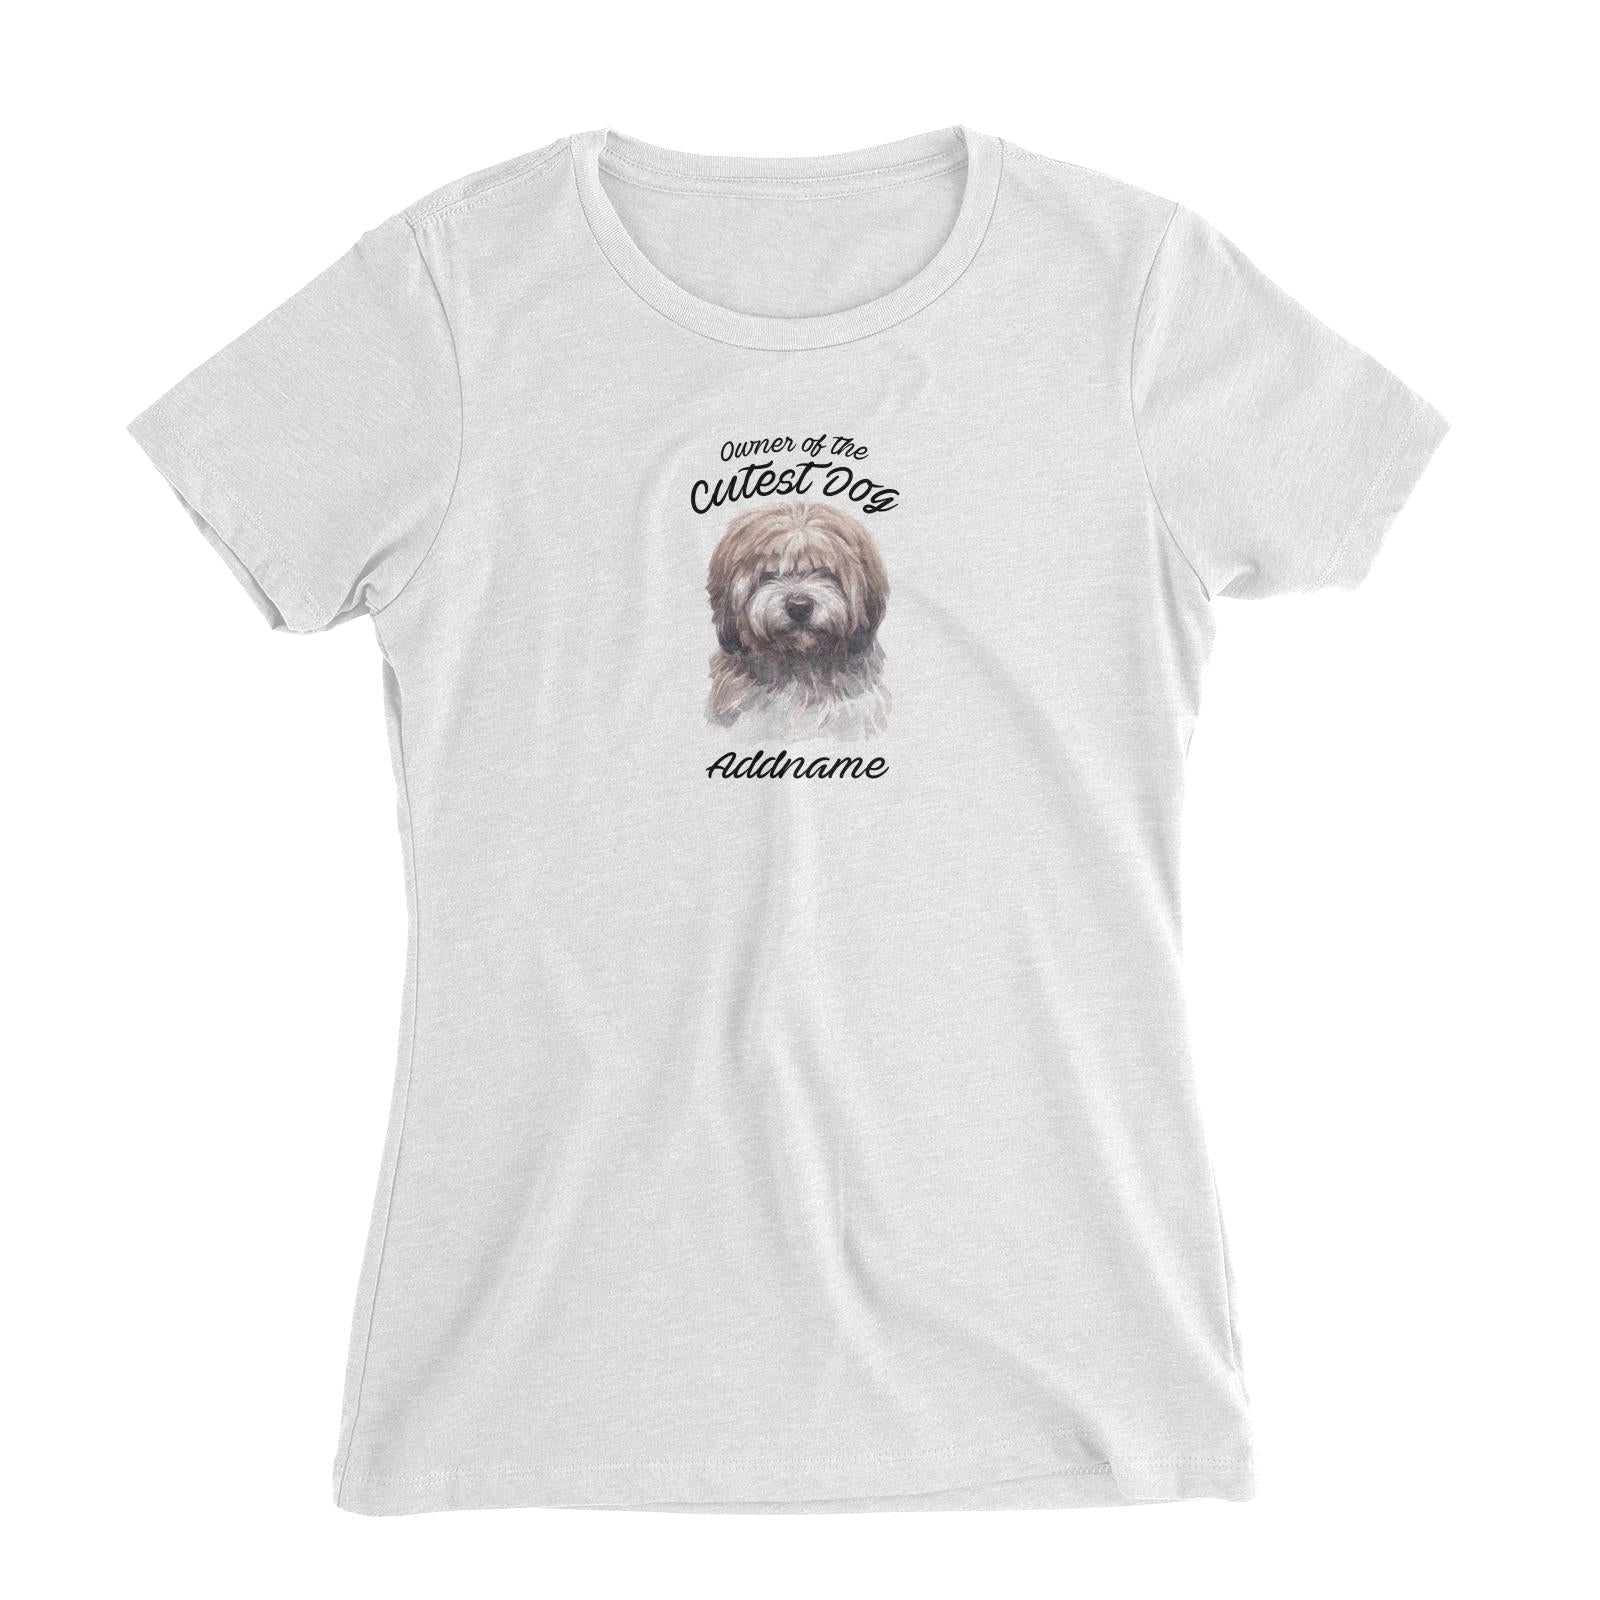 Watercolor Dog Owner Of The Cutest Dog Tibetan Addname Women's Slim Fit T-Shirt